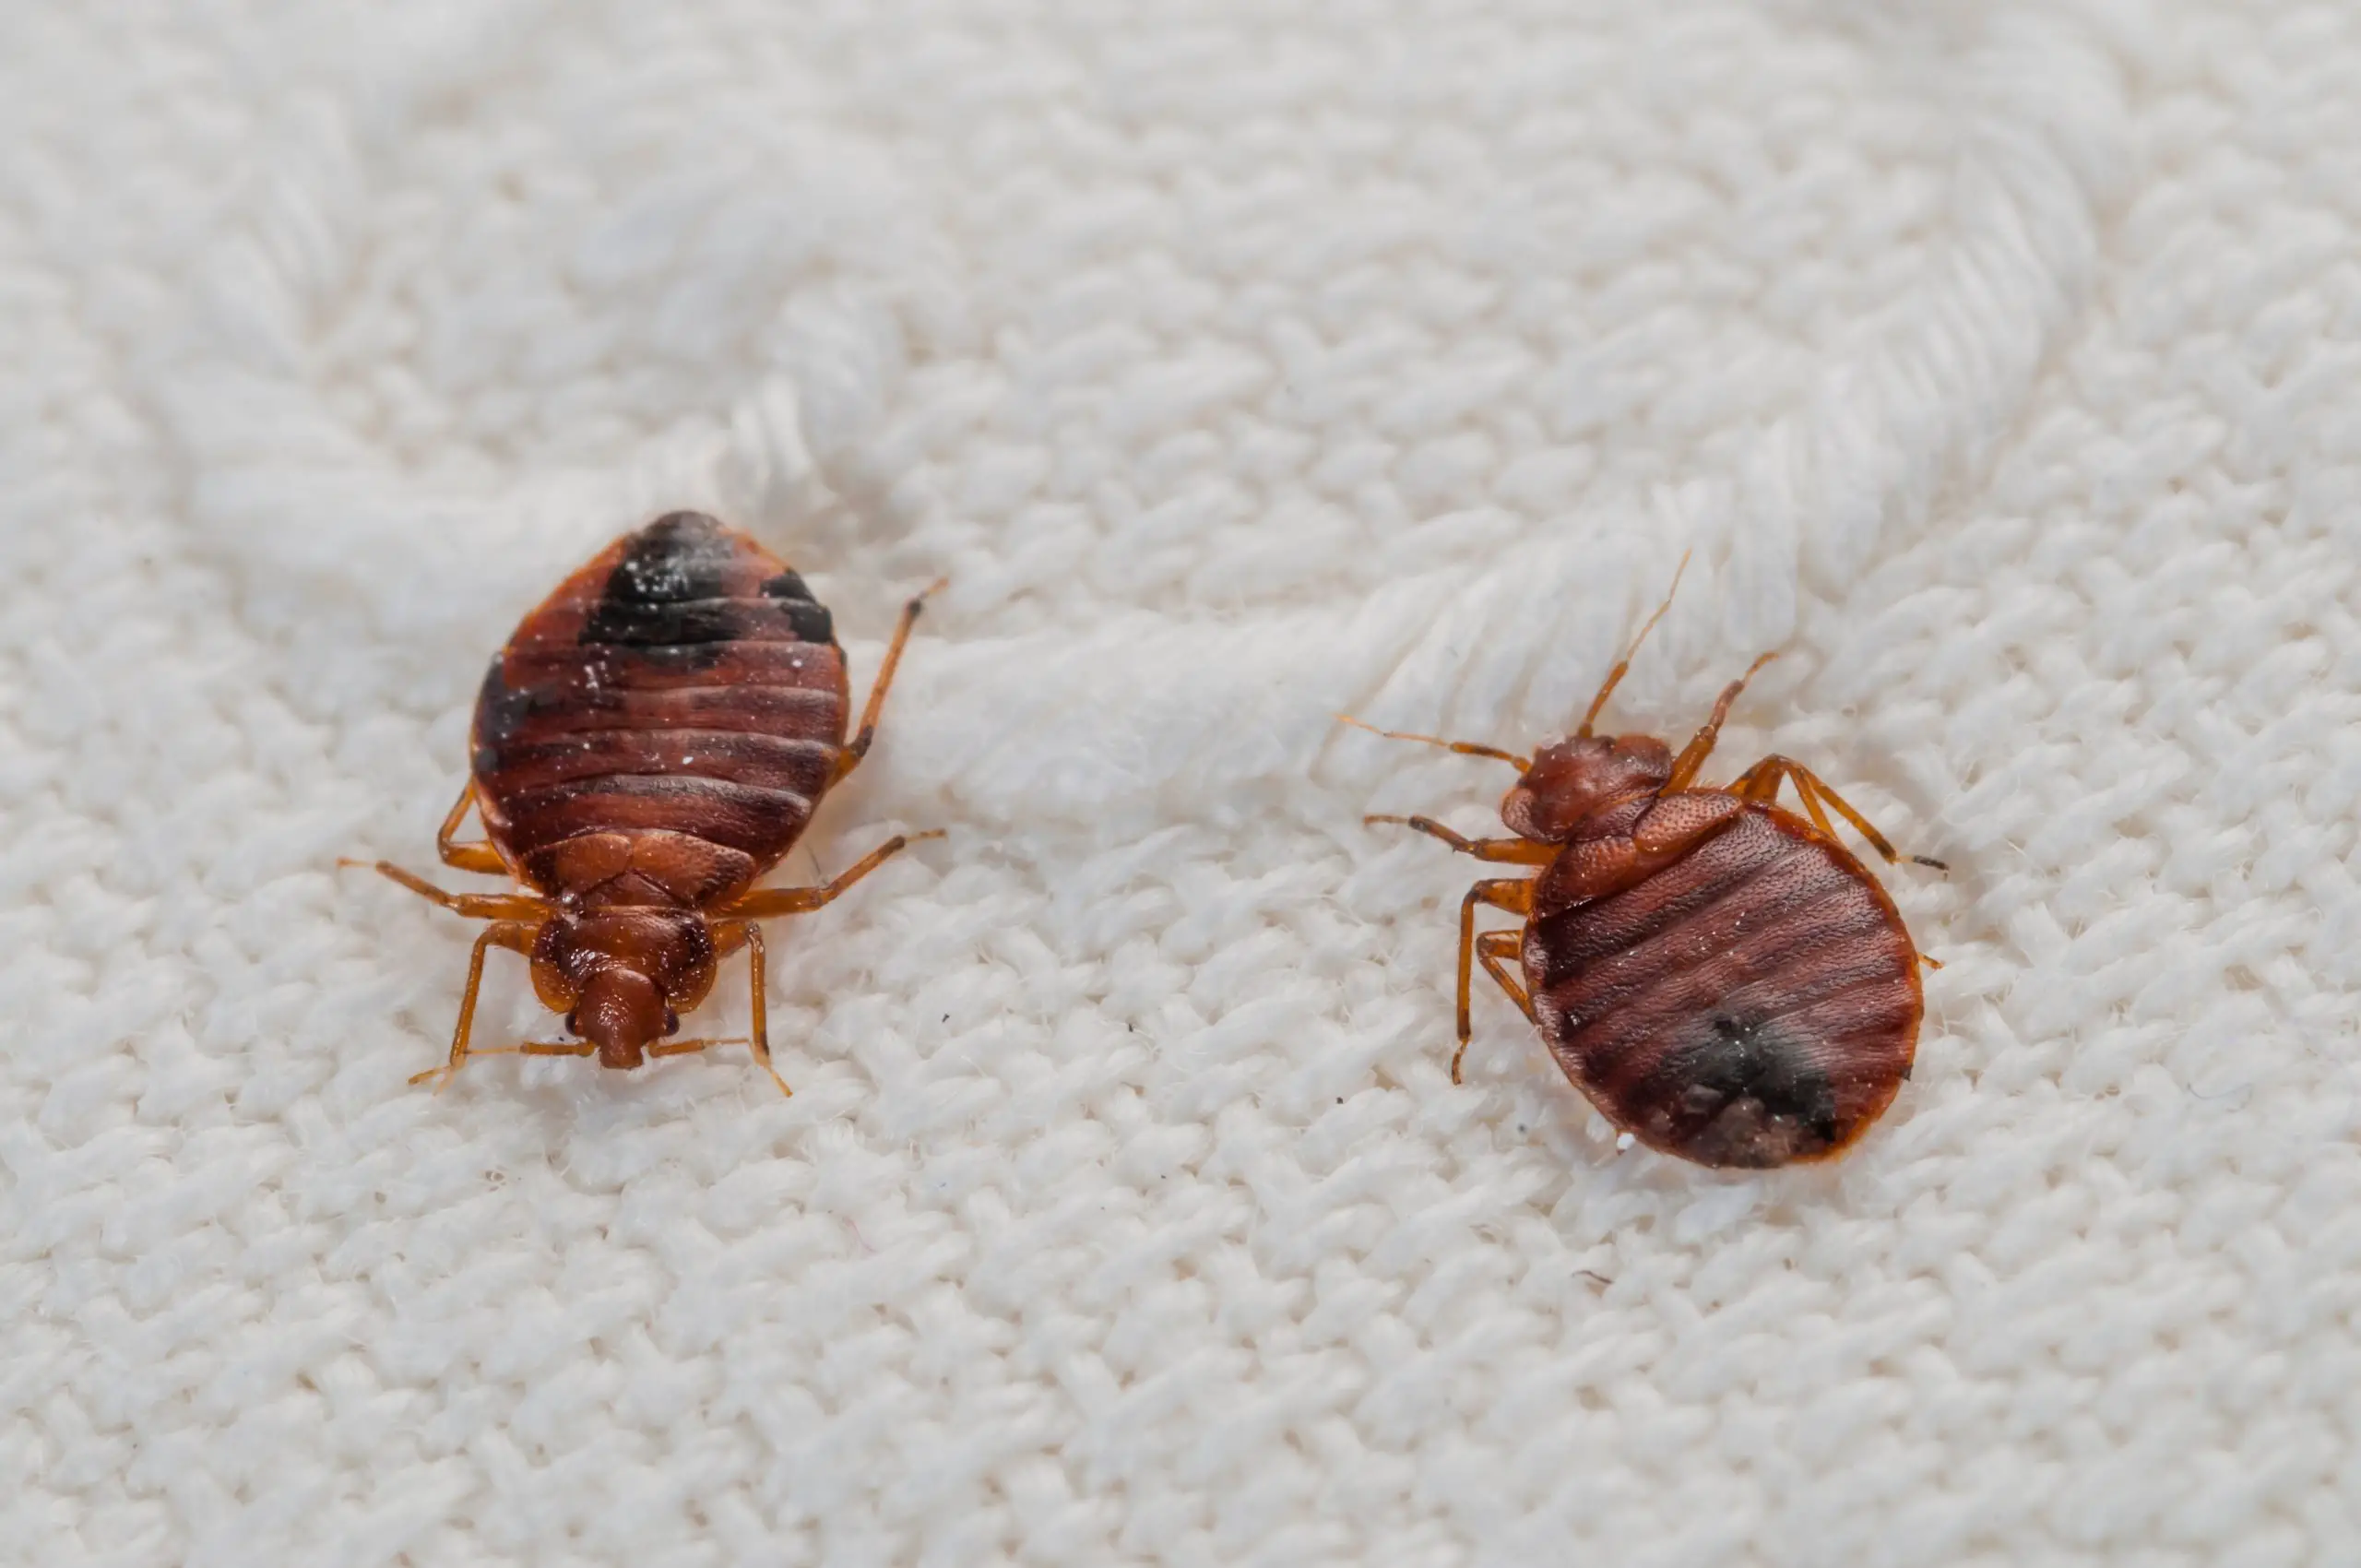 Can Bed Bugs Cause Cellulitis?